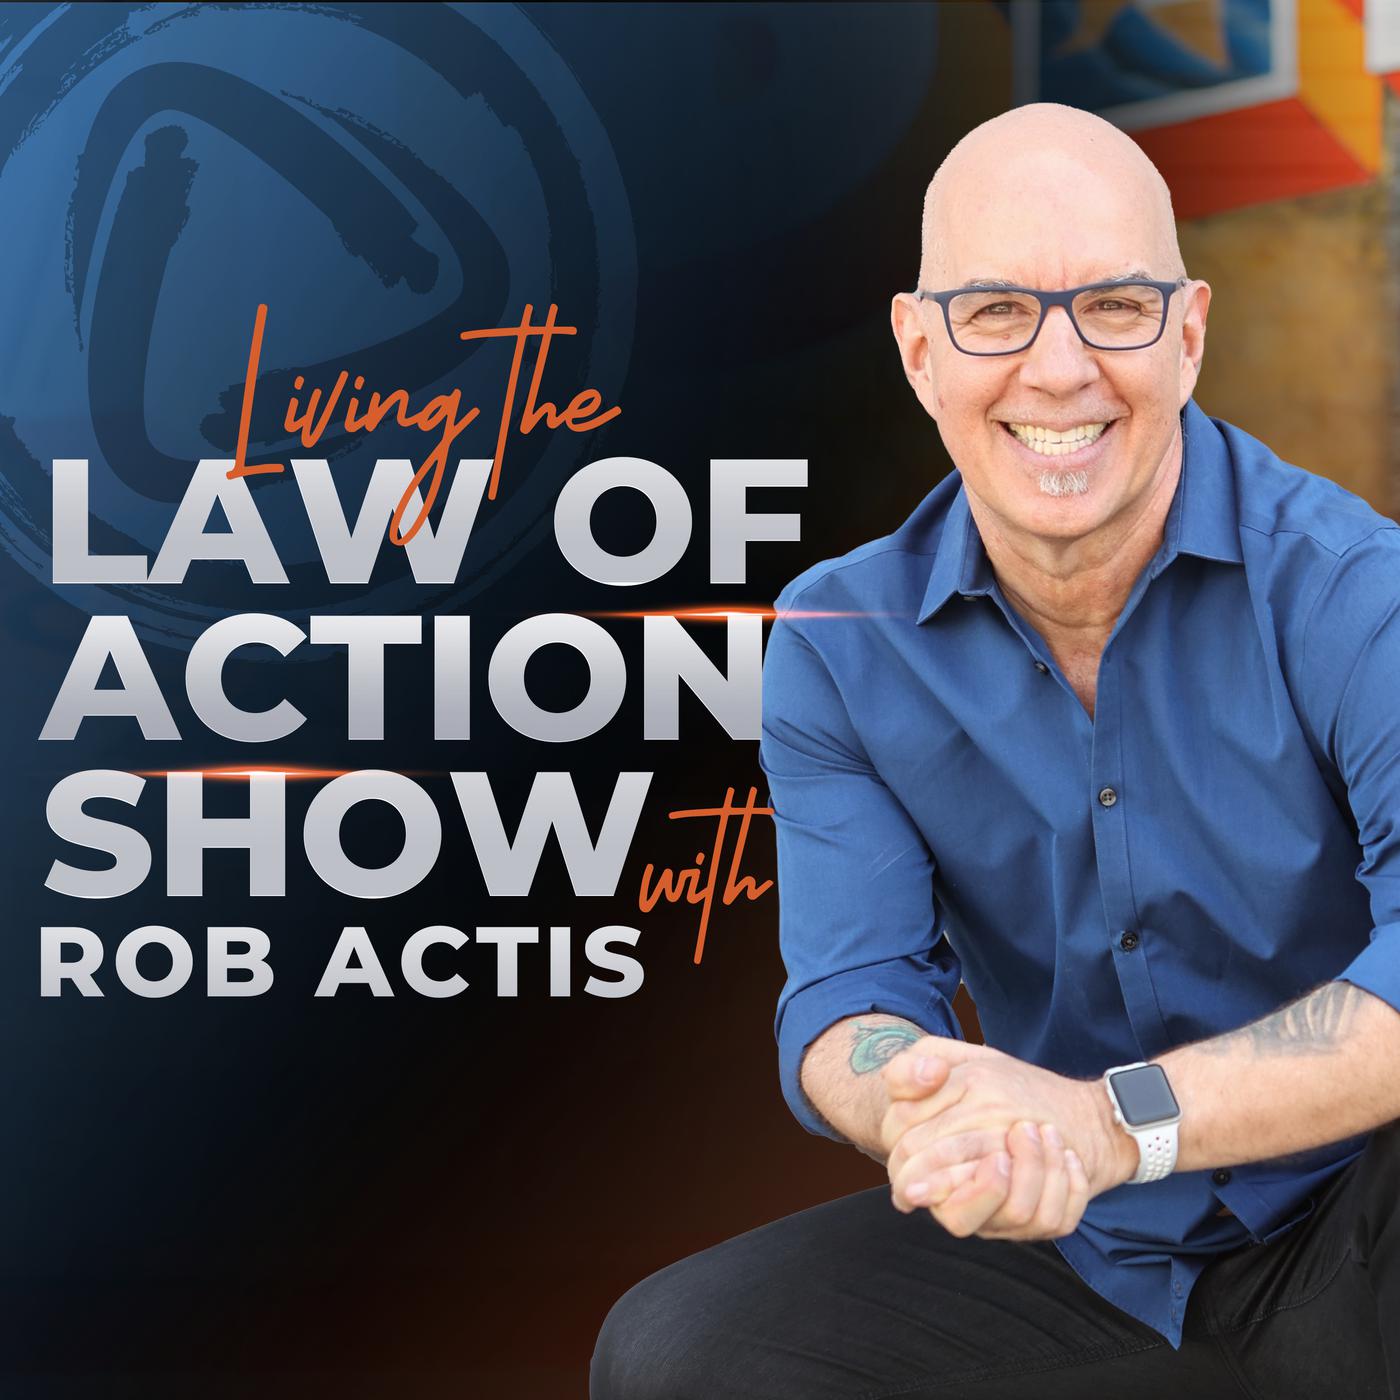 Living the Law of Action Show Nov. 6